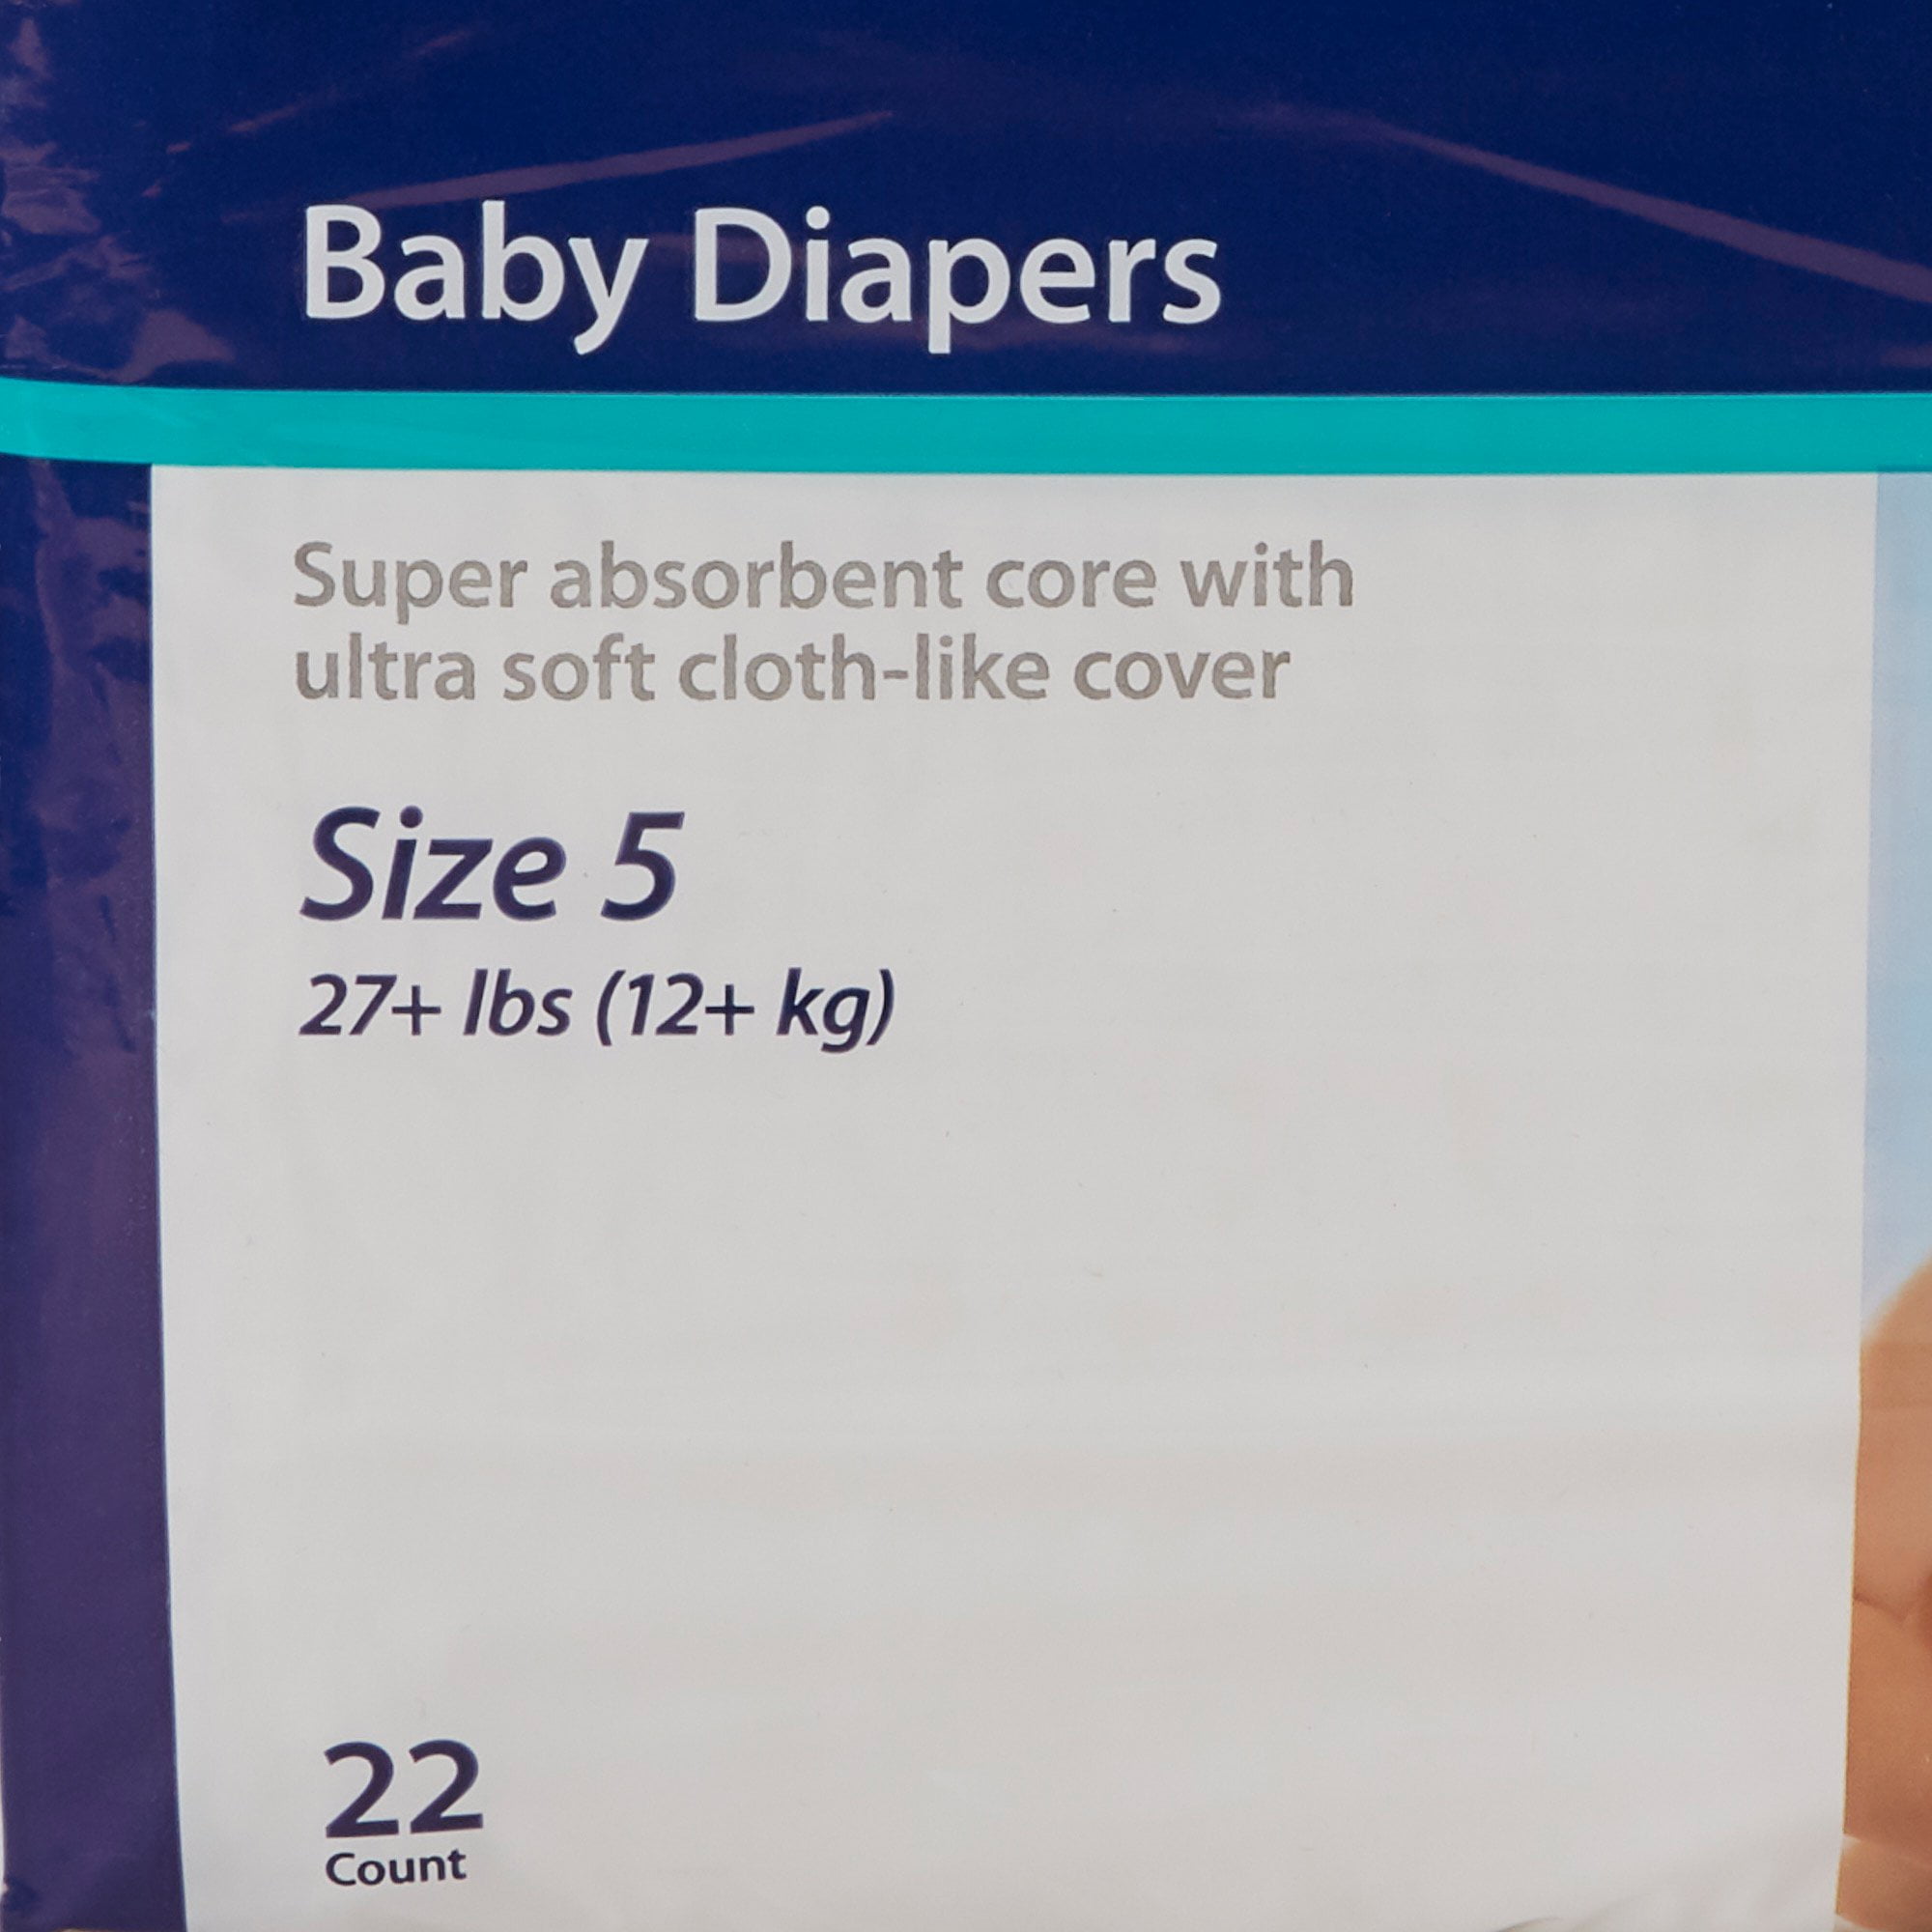 Curity Baby Baby Diaper Size 5, Over 27 lbs. 80048A, 22 Ct 